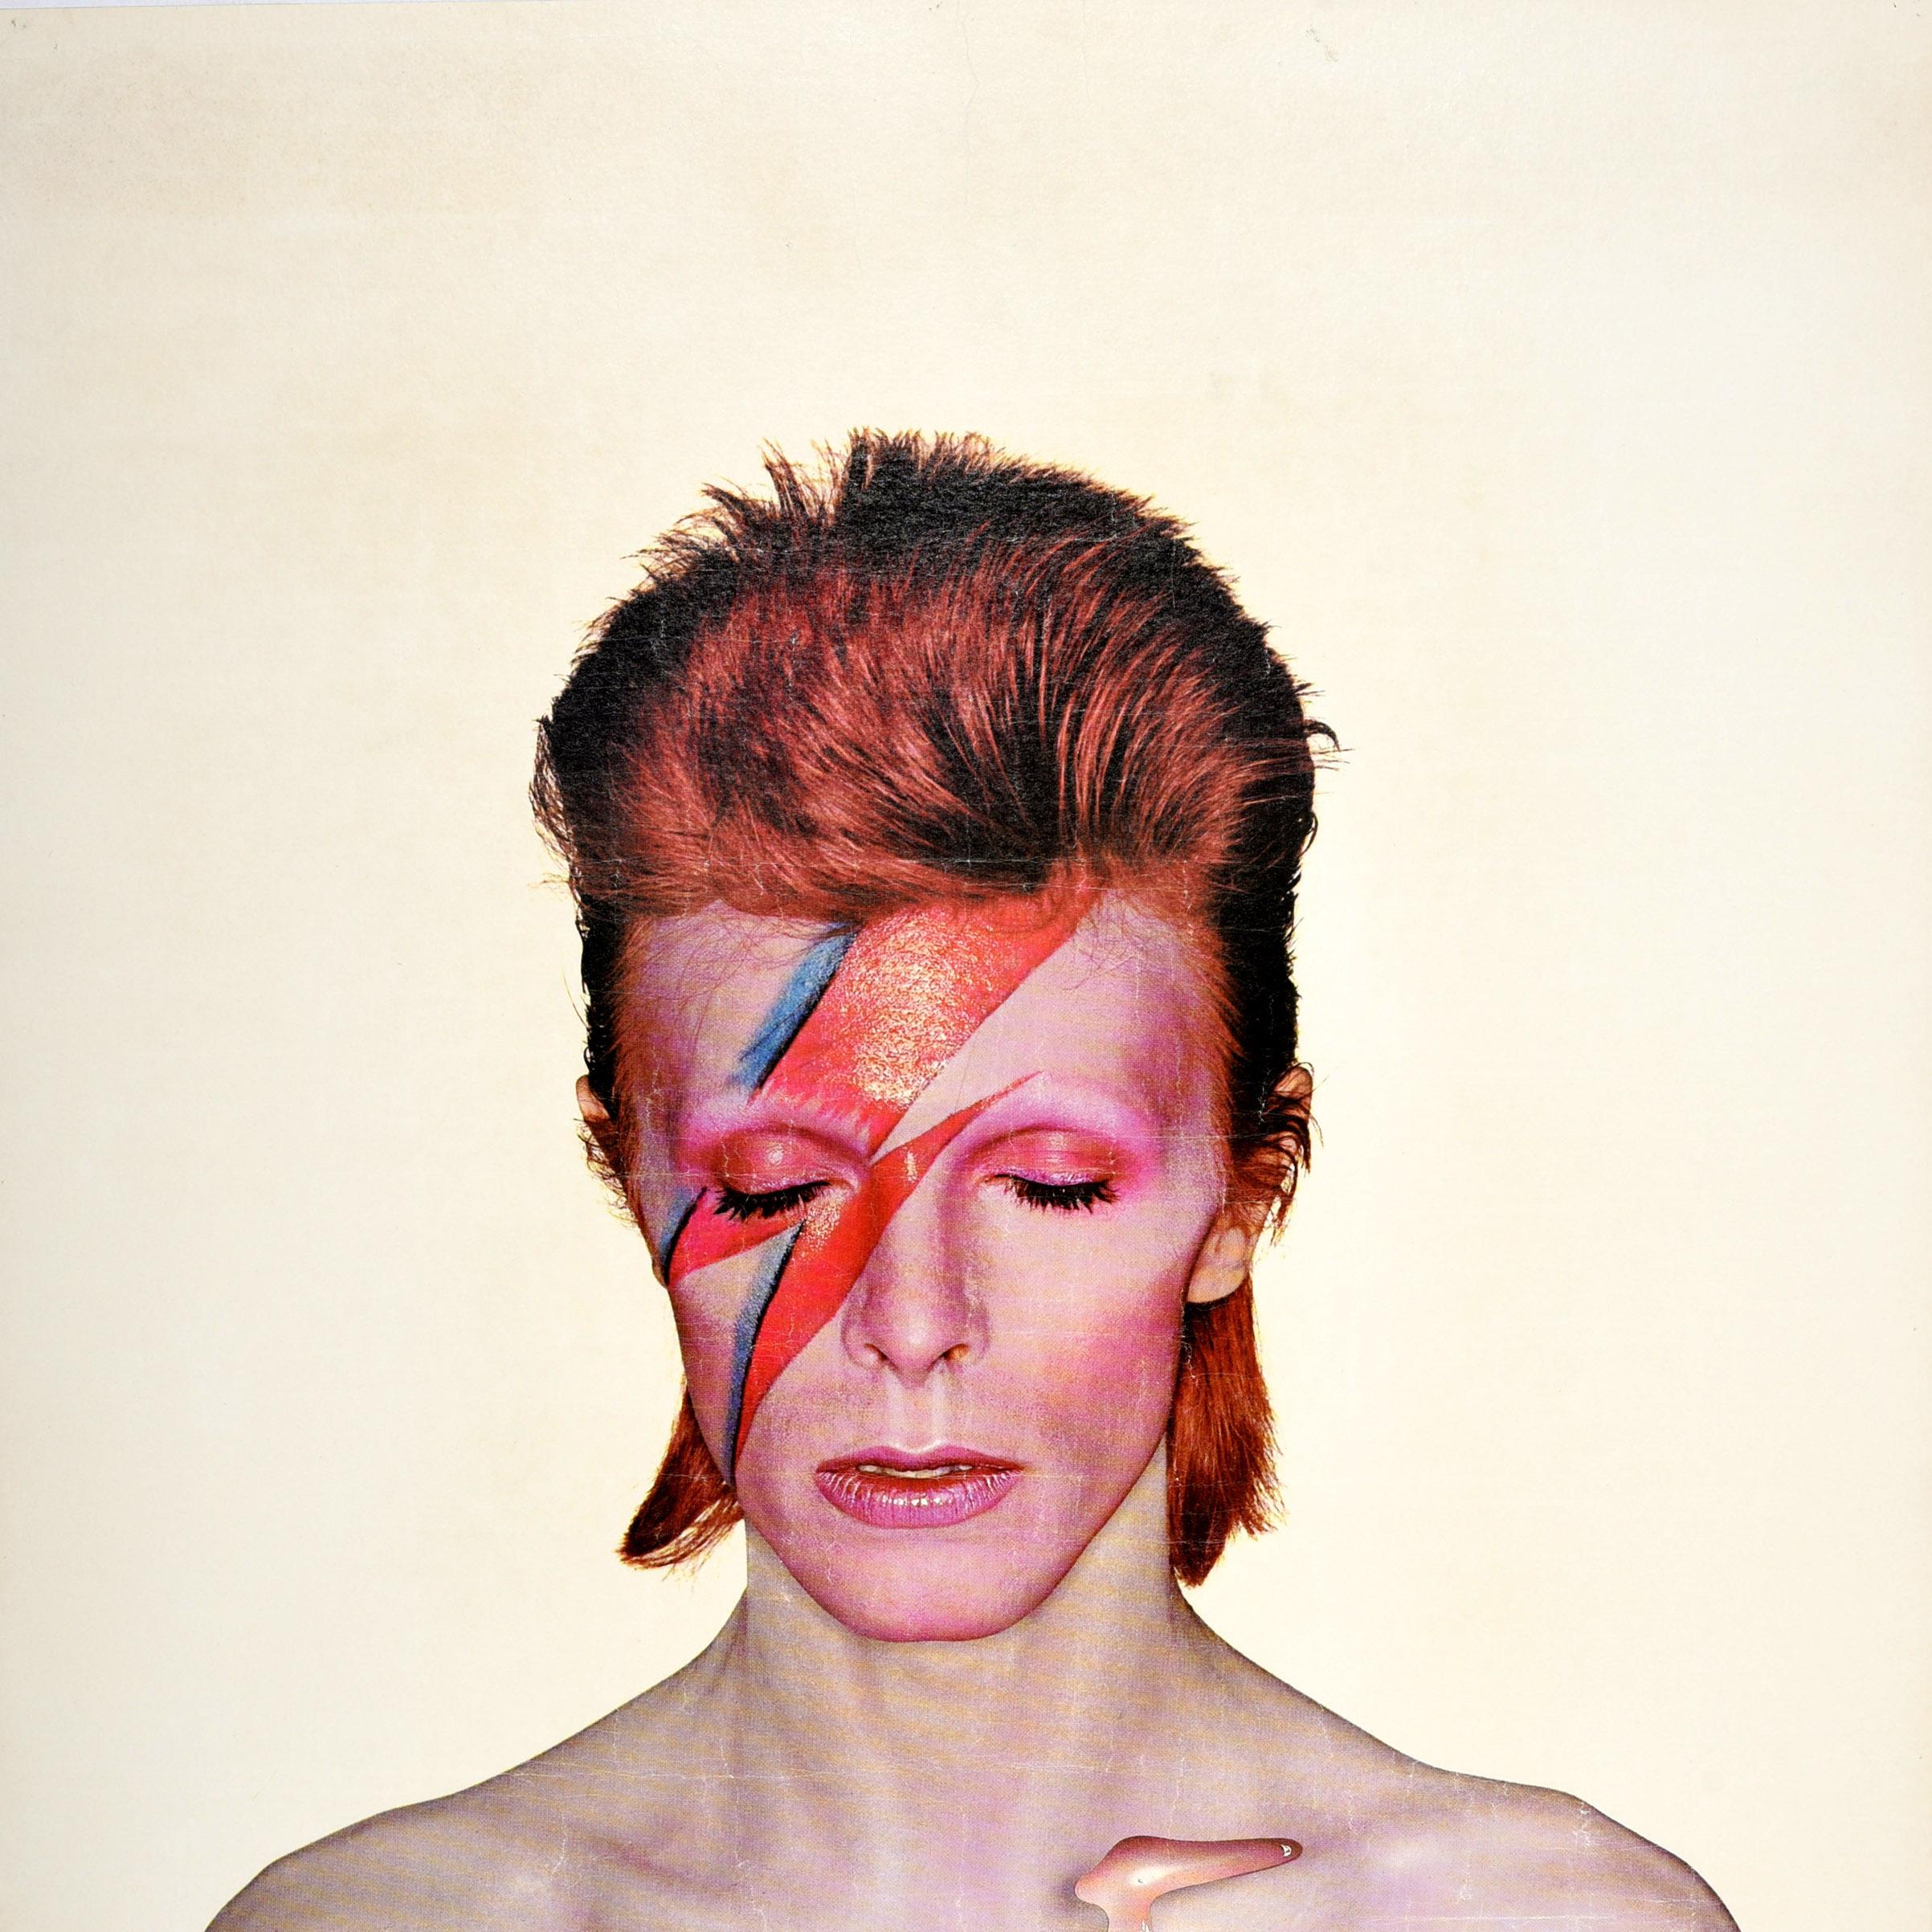 Original vintage music advertising poster for the David Bowie album Aladdin Sane released in 1973 featuring the iconic cover artwork by the English photographer Brian Duffy (1933-2010) of Bowie with red hair and his eyes closed, a red and blue